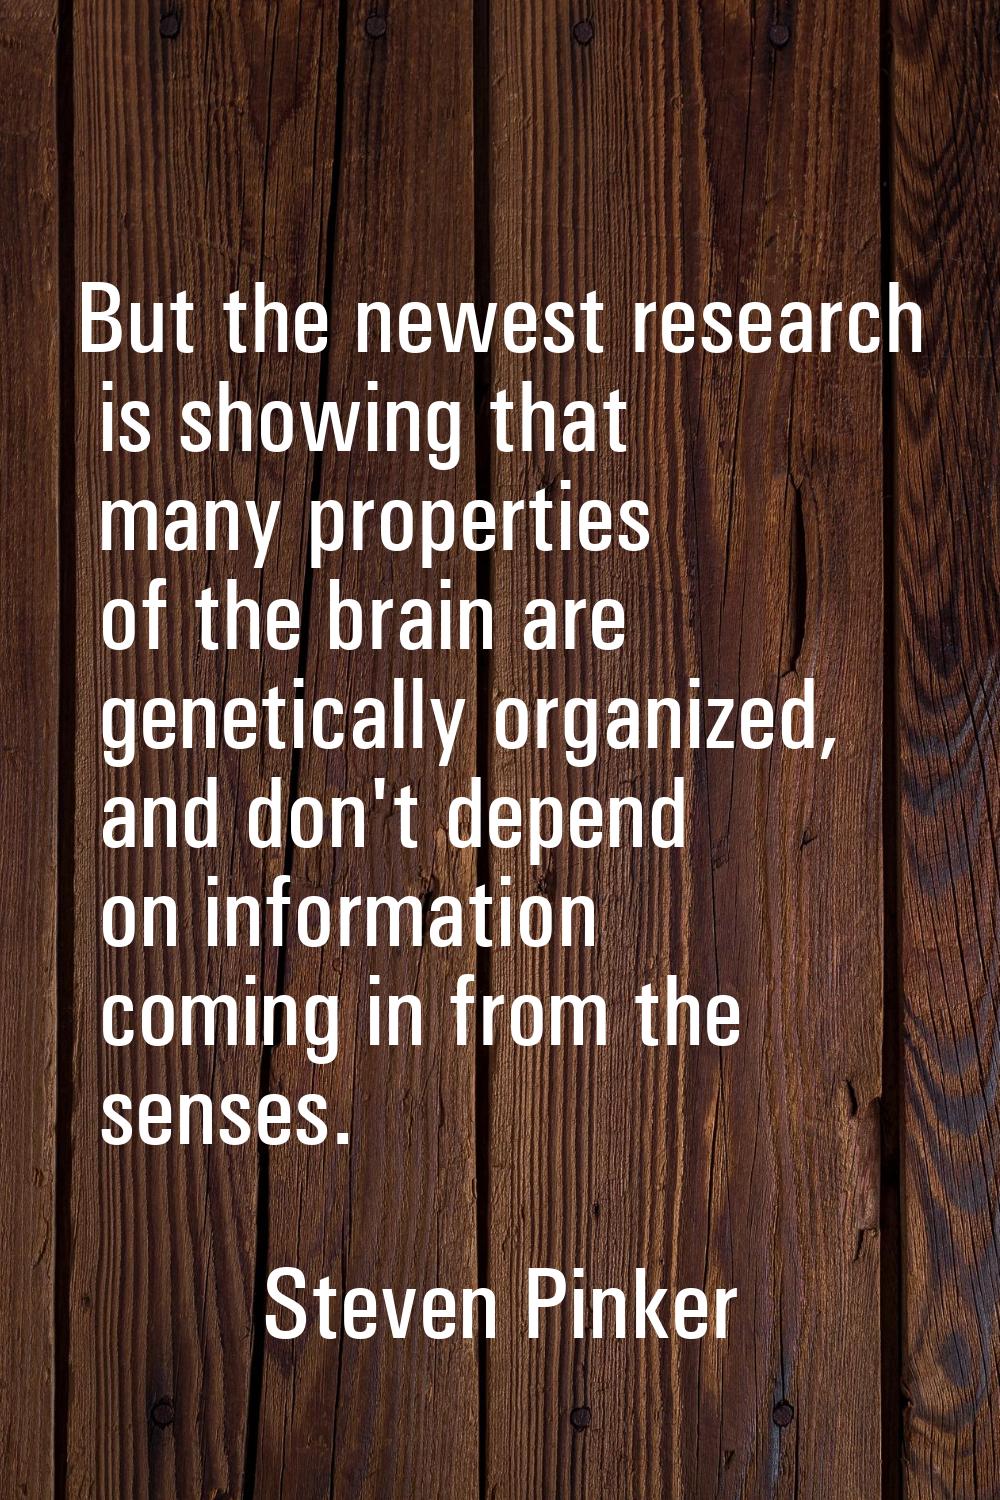 But the newest research is showing that many properties of the brain are genetically organized, and